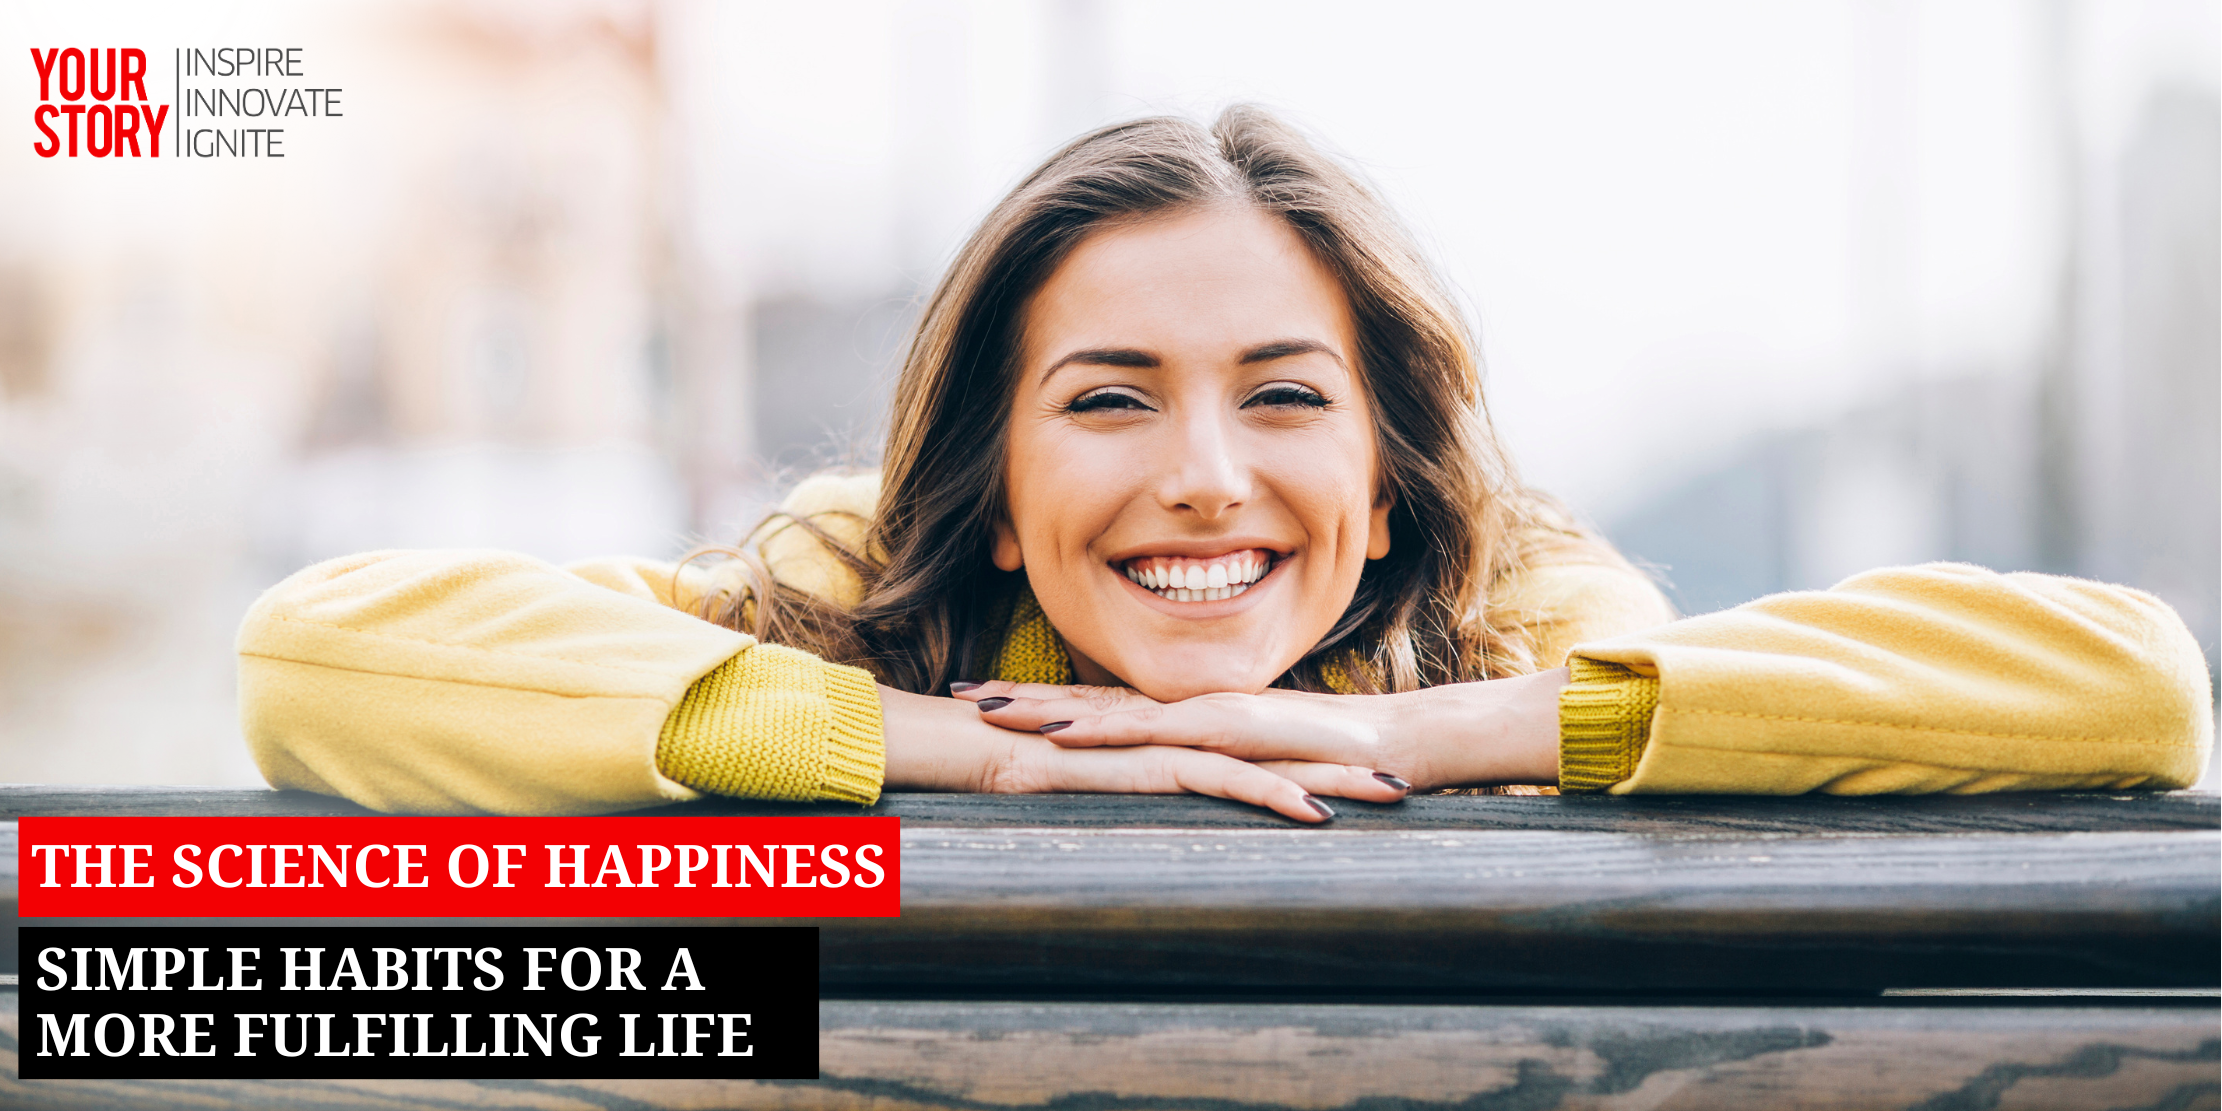 The Science of Happiness: Simple Habits for a More Fulfilling Life